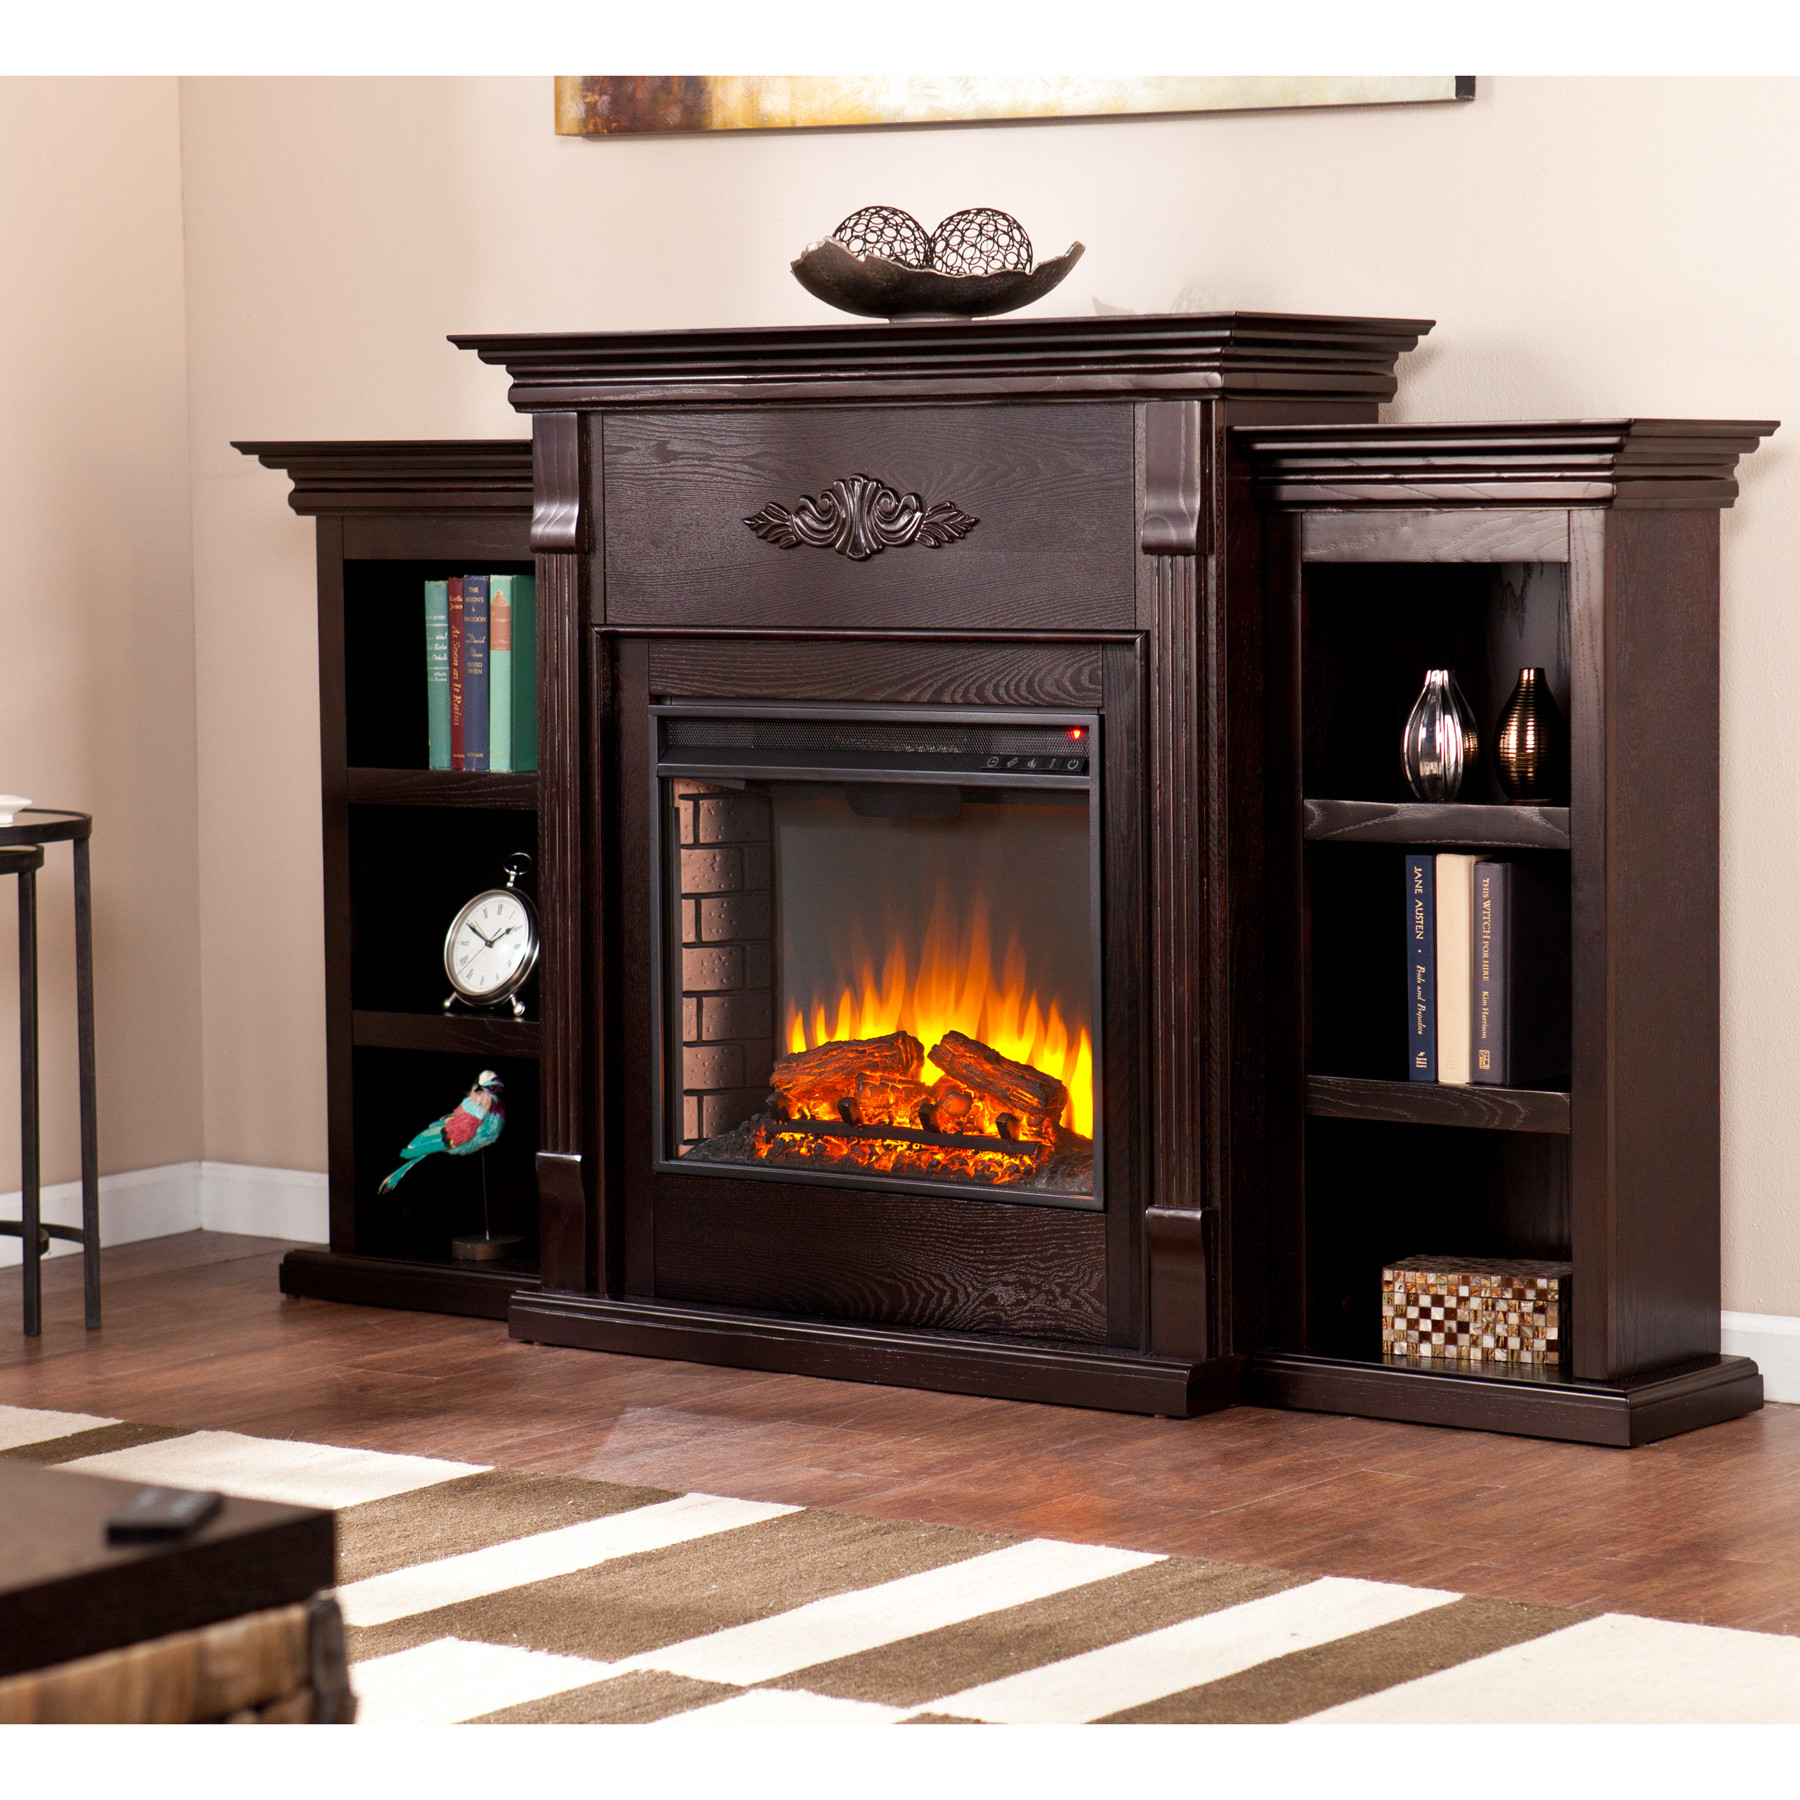 Electric Fireplace With Bookcase
 Tennyson Electric Fireplace W Bookcases Classic Espresso